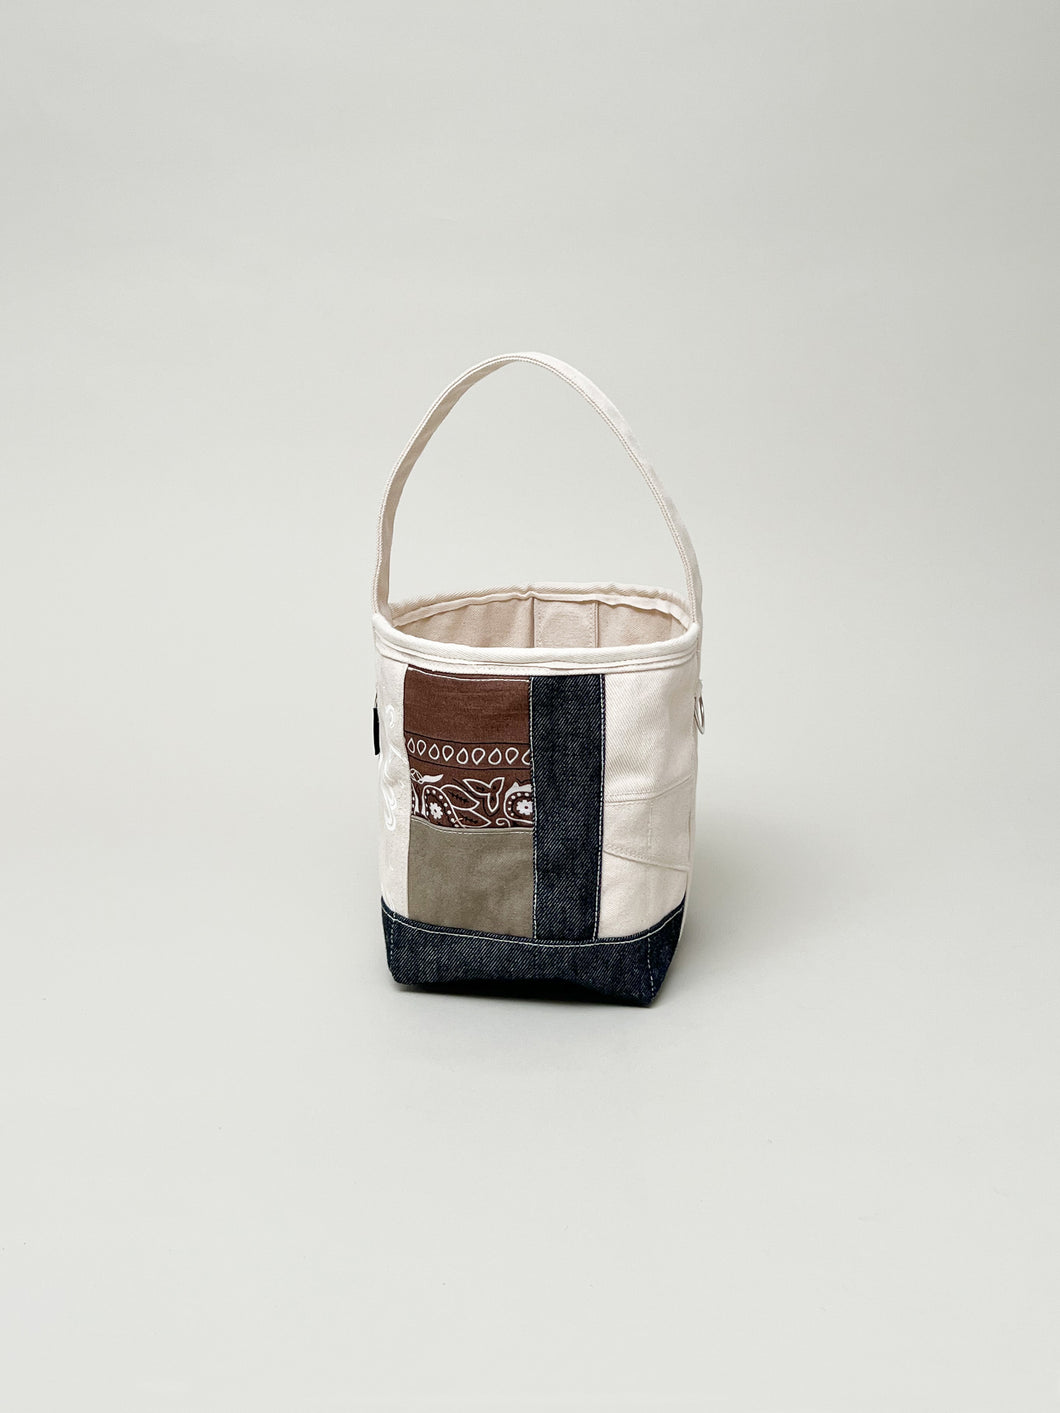 THE PATCHWORK SMALL BUCKET TOTE